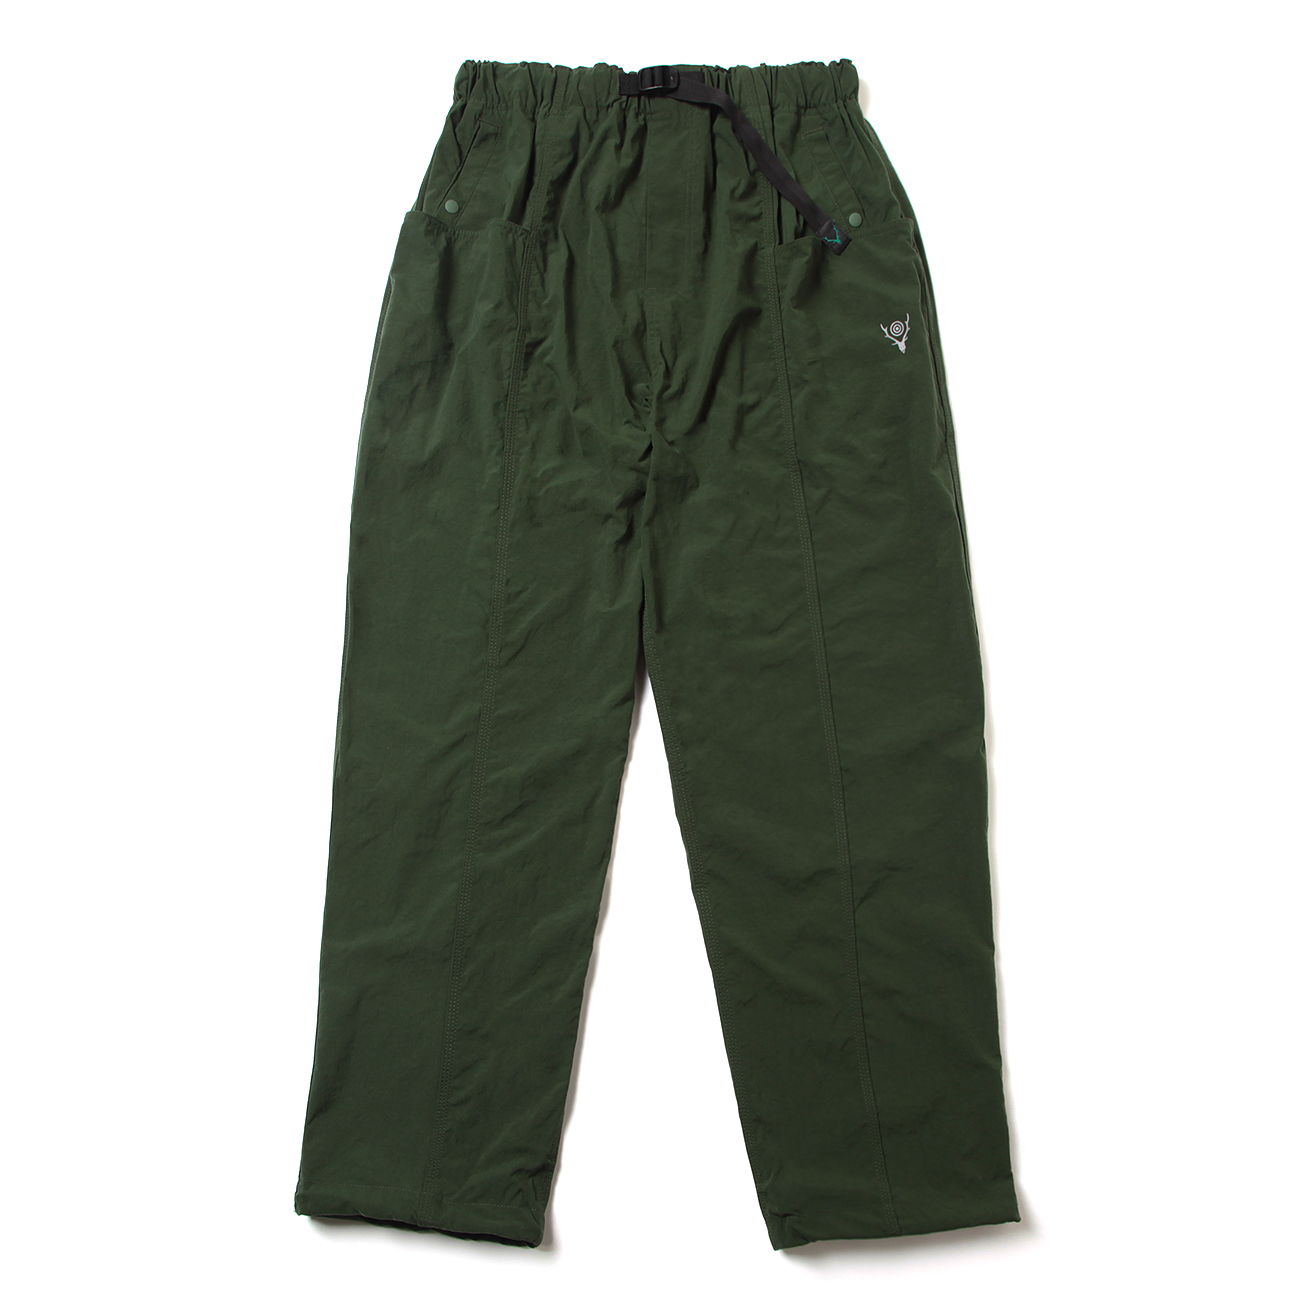 South2 West8 / サウスツーウエストエイト   Belted C.S. Pant   Nylon